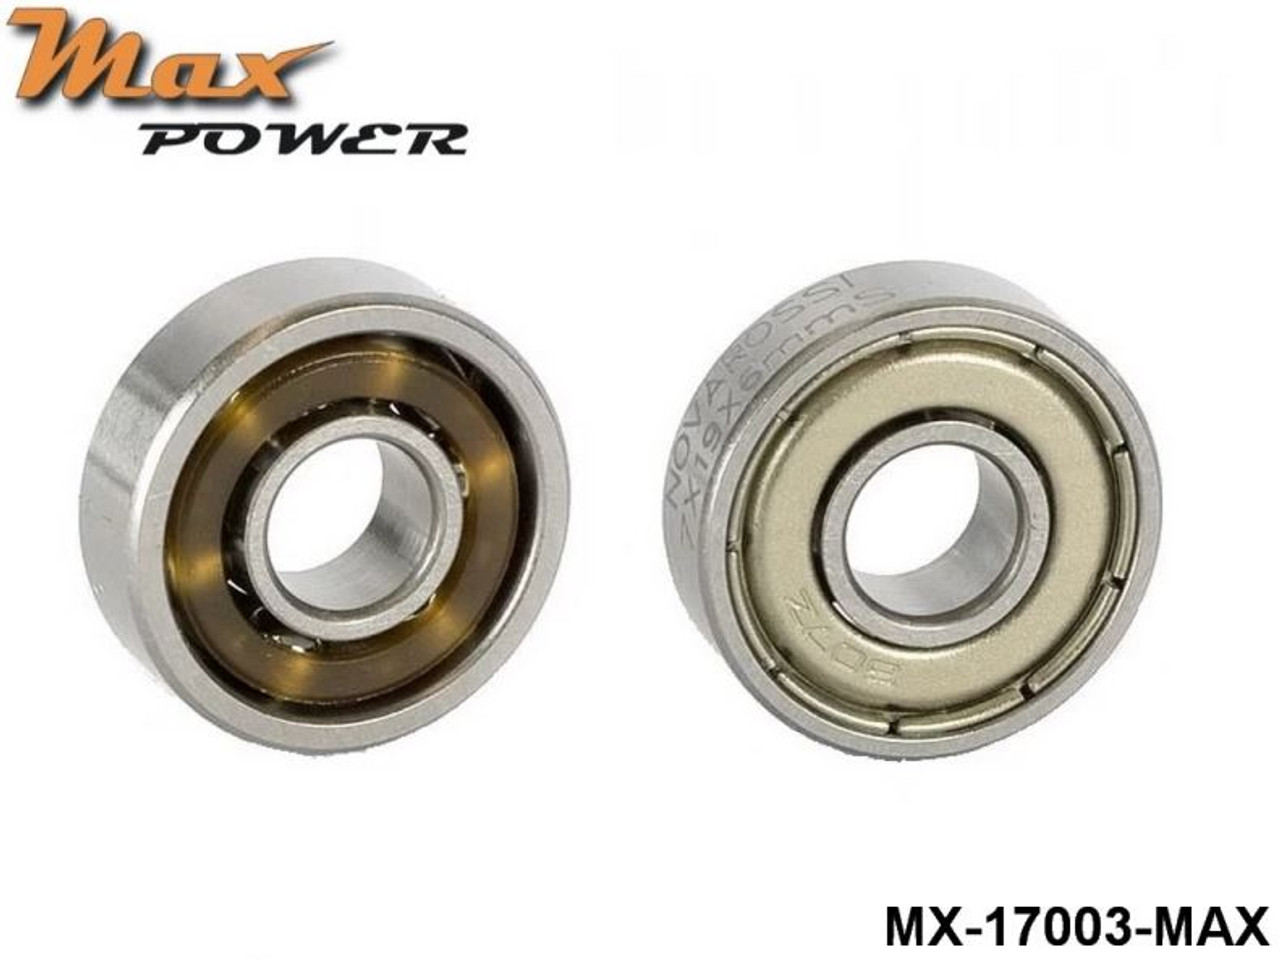 Max Power Front Bearing 7 x 19 x 6